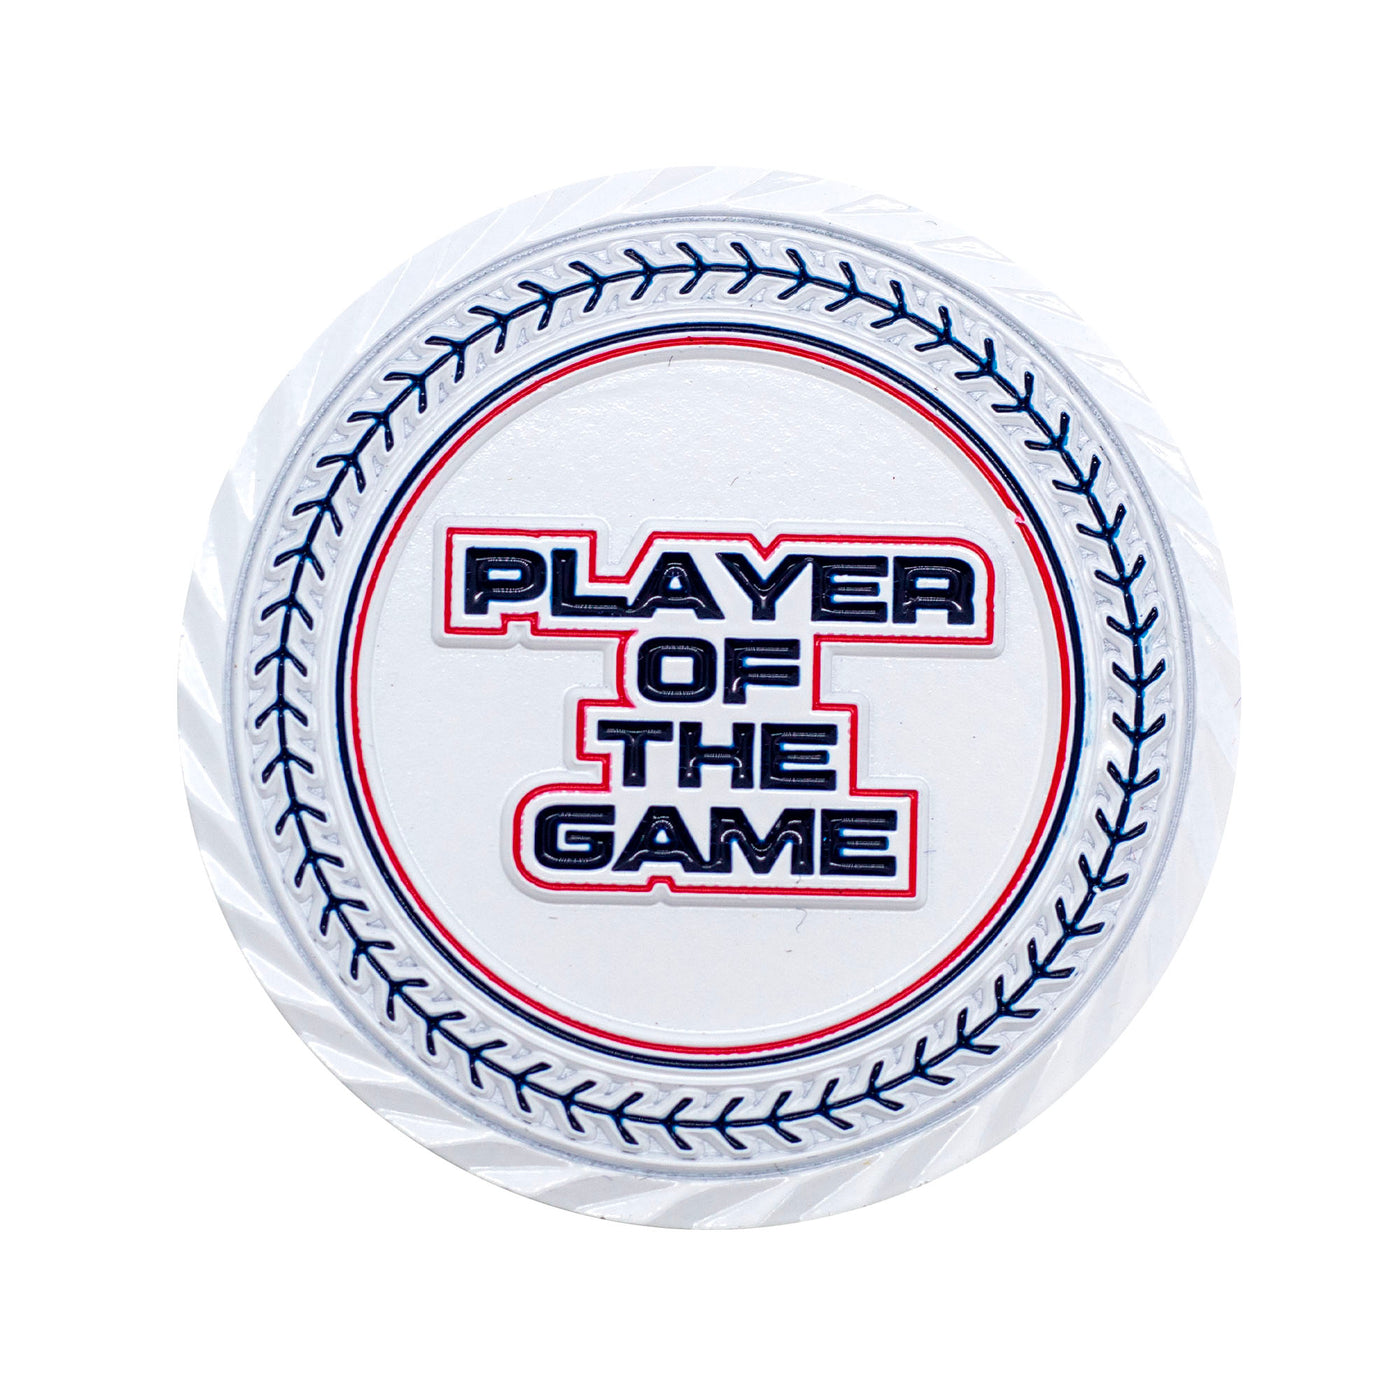 GEN2 2" PLAYER OF THE GAME Coin